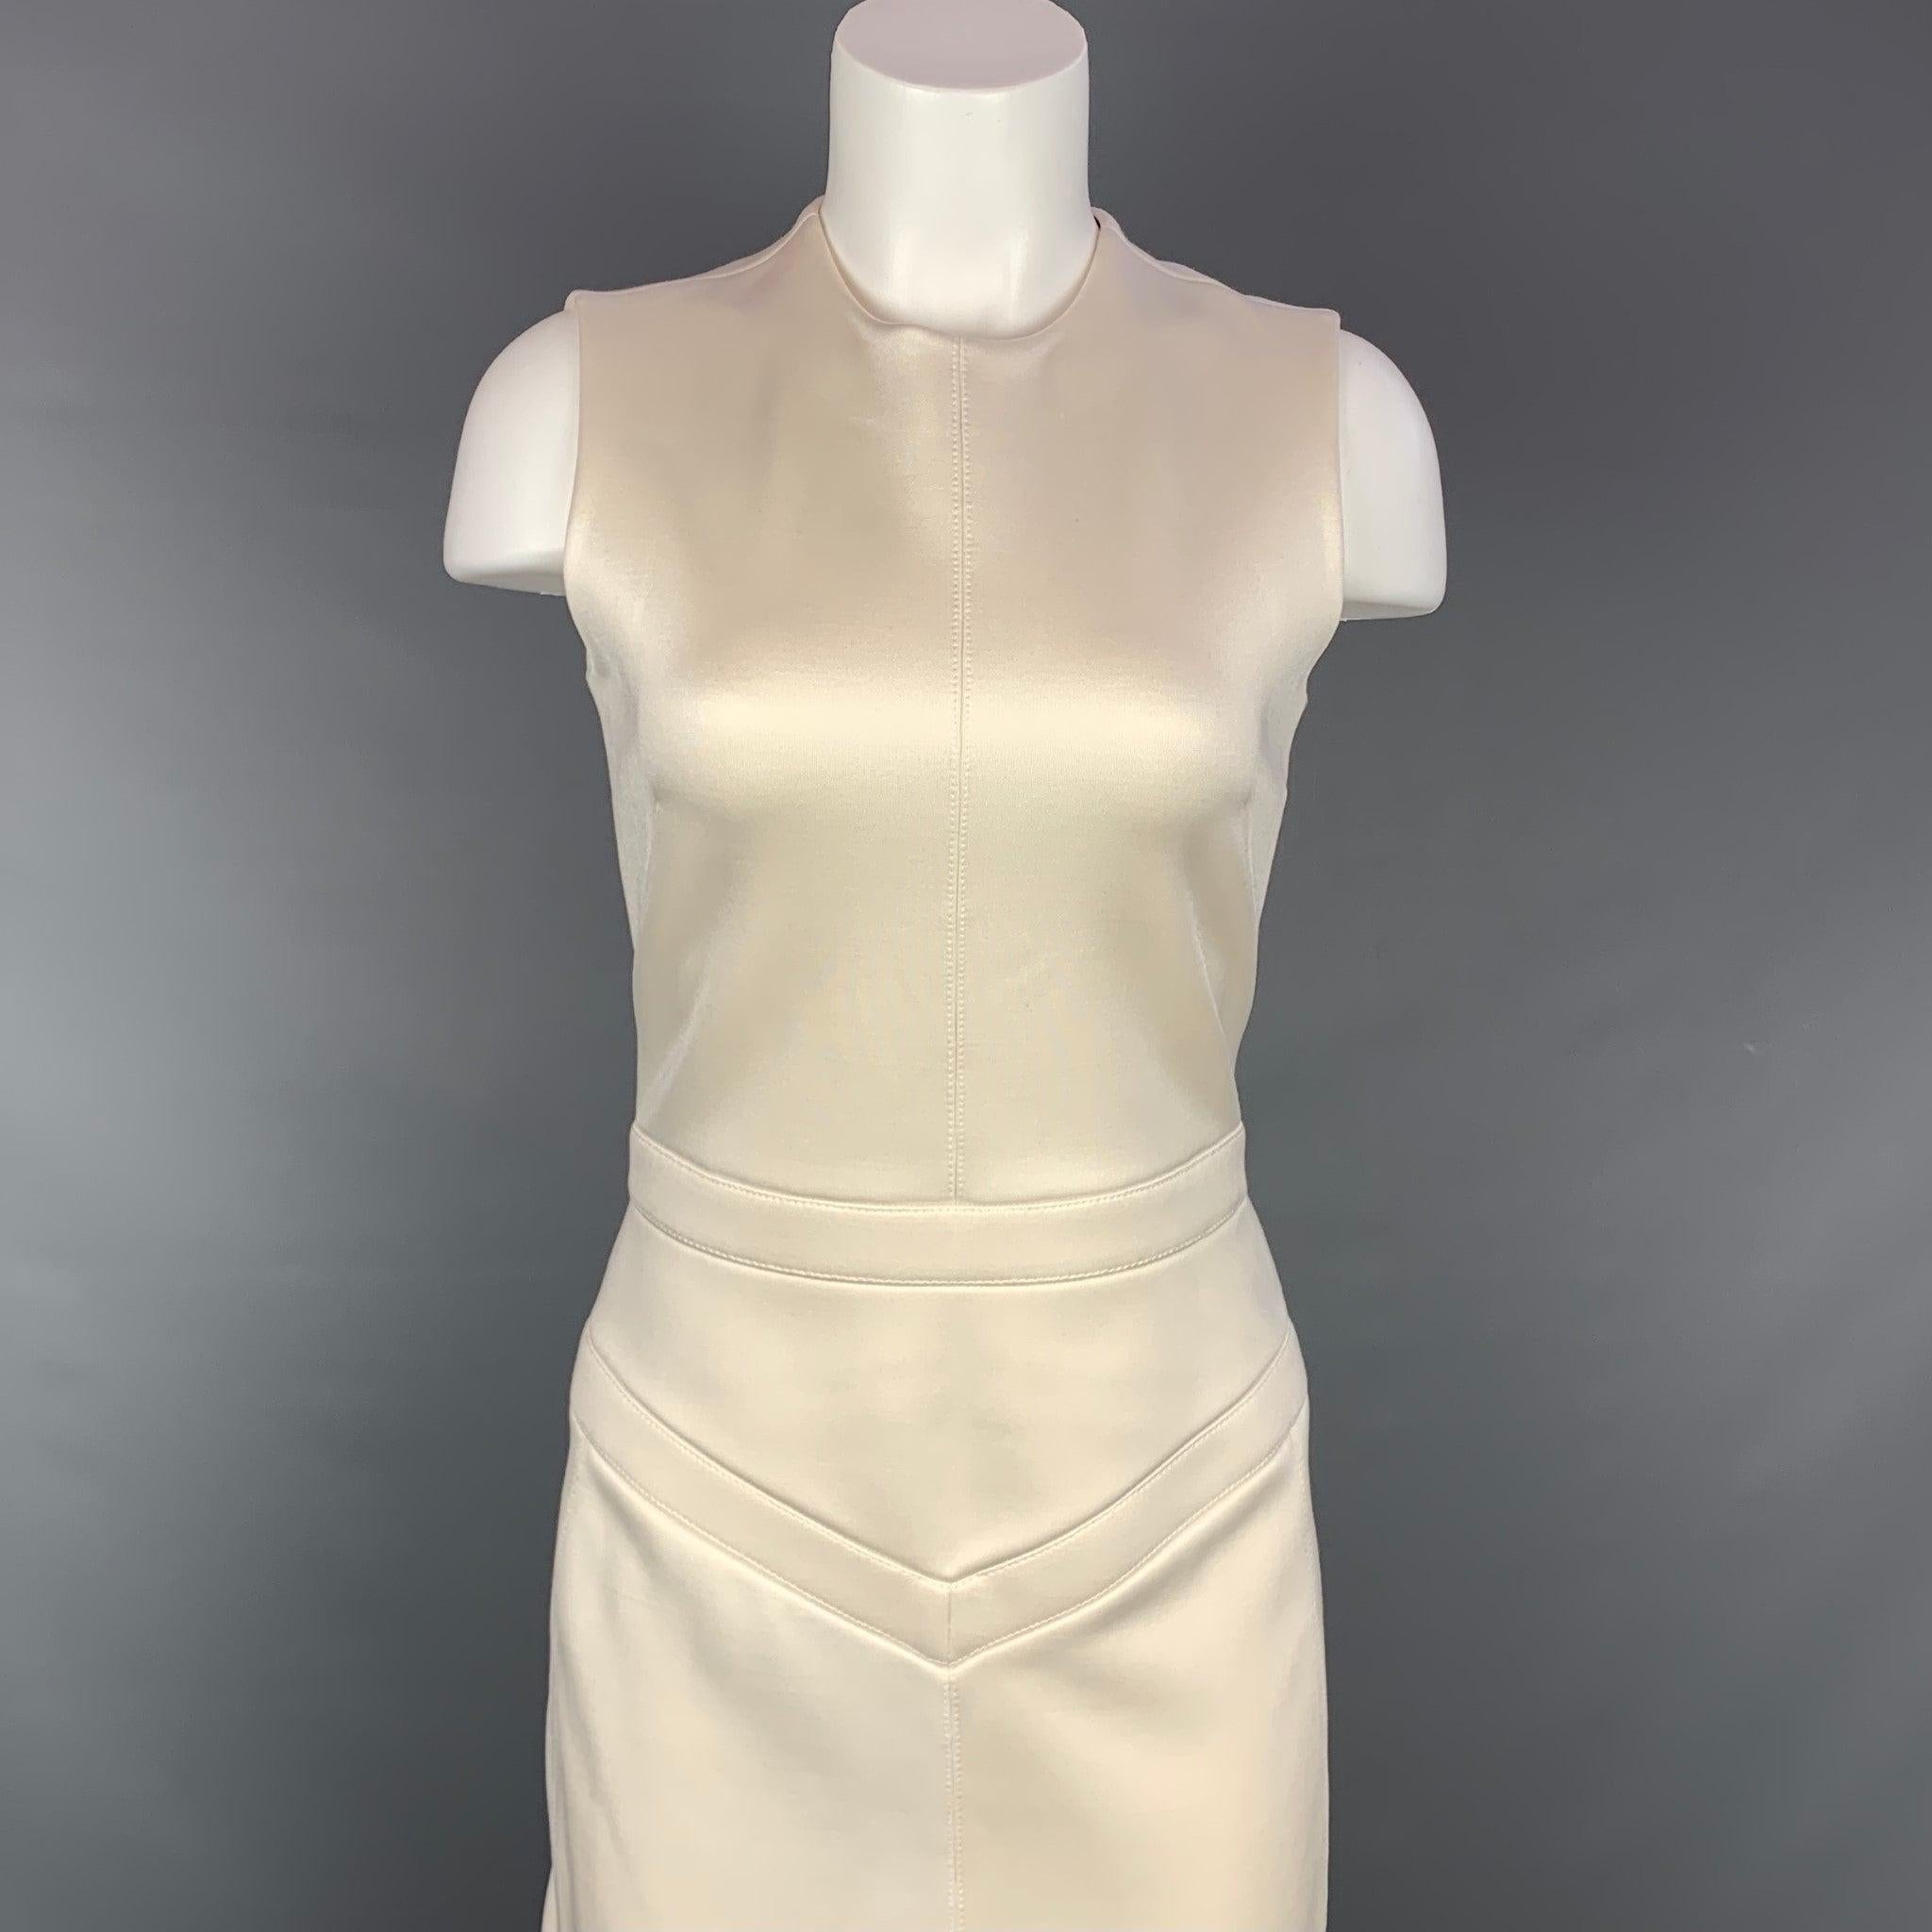 LOUIS VUITTON Size S Beige Ecru Wool Blend Ruffled Fitted Cocktail Dress In Good Condition For Sale In San Francisco, CA